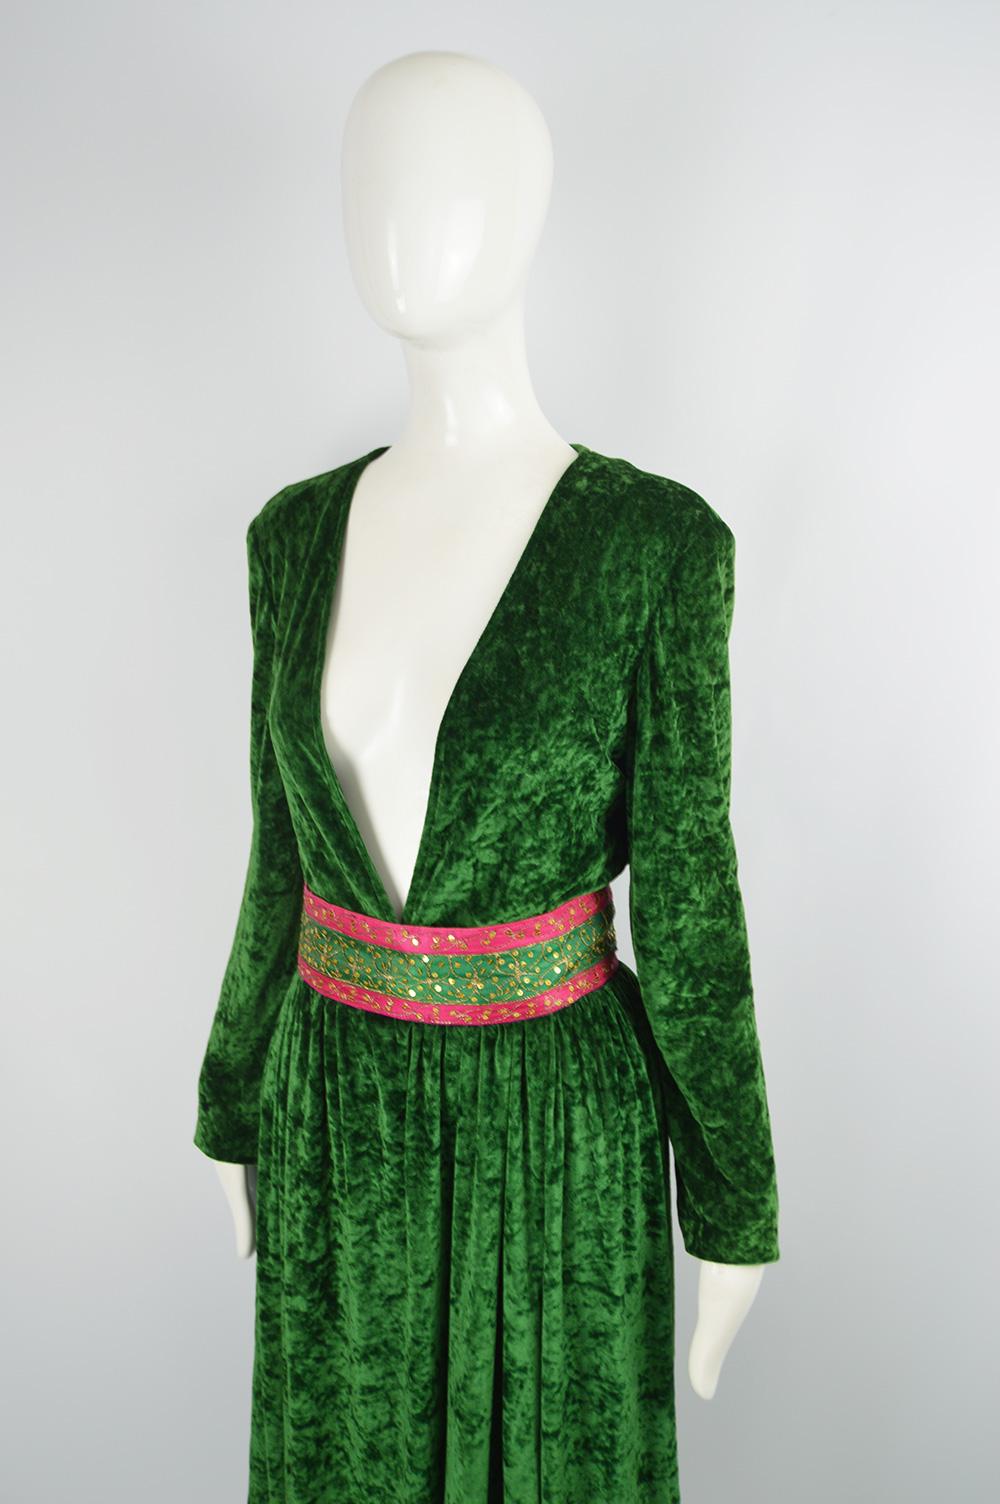 Bellville Sassoon Hippie Luxe Vintage Green Panne Velvet 3 Piece Skirt Set 1970s In Excellent Condition For Sale In Doncaster, South Yorkshire